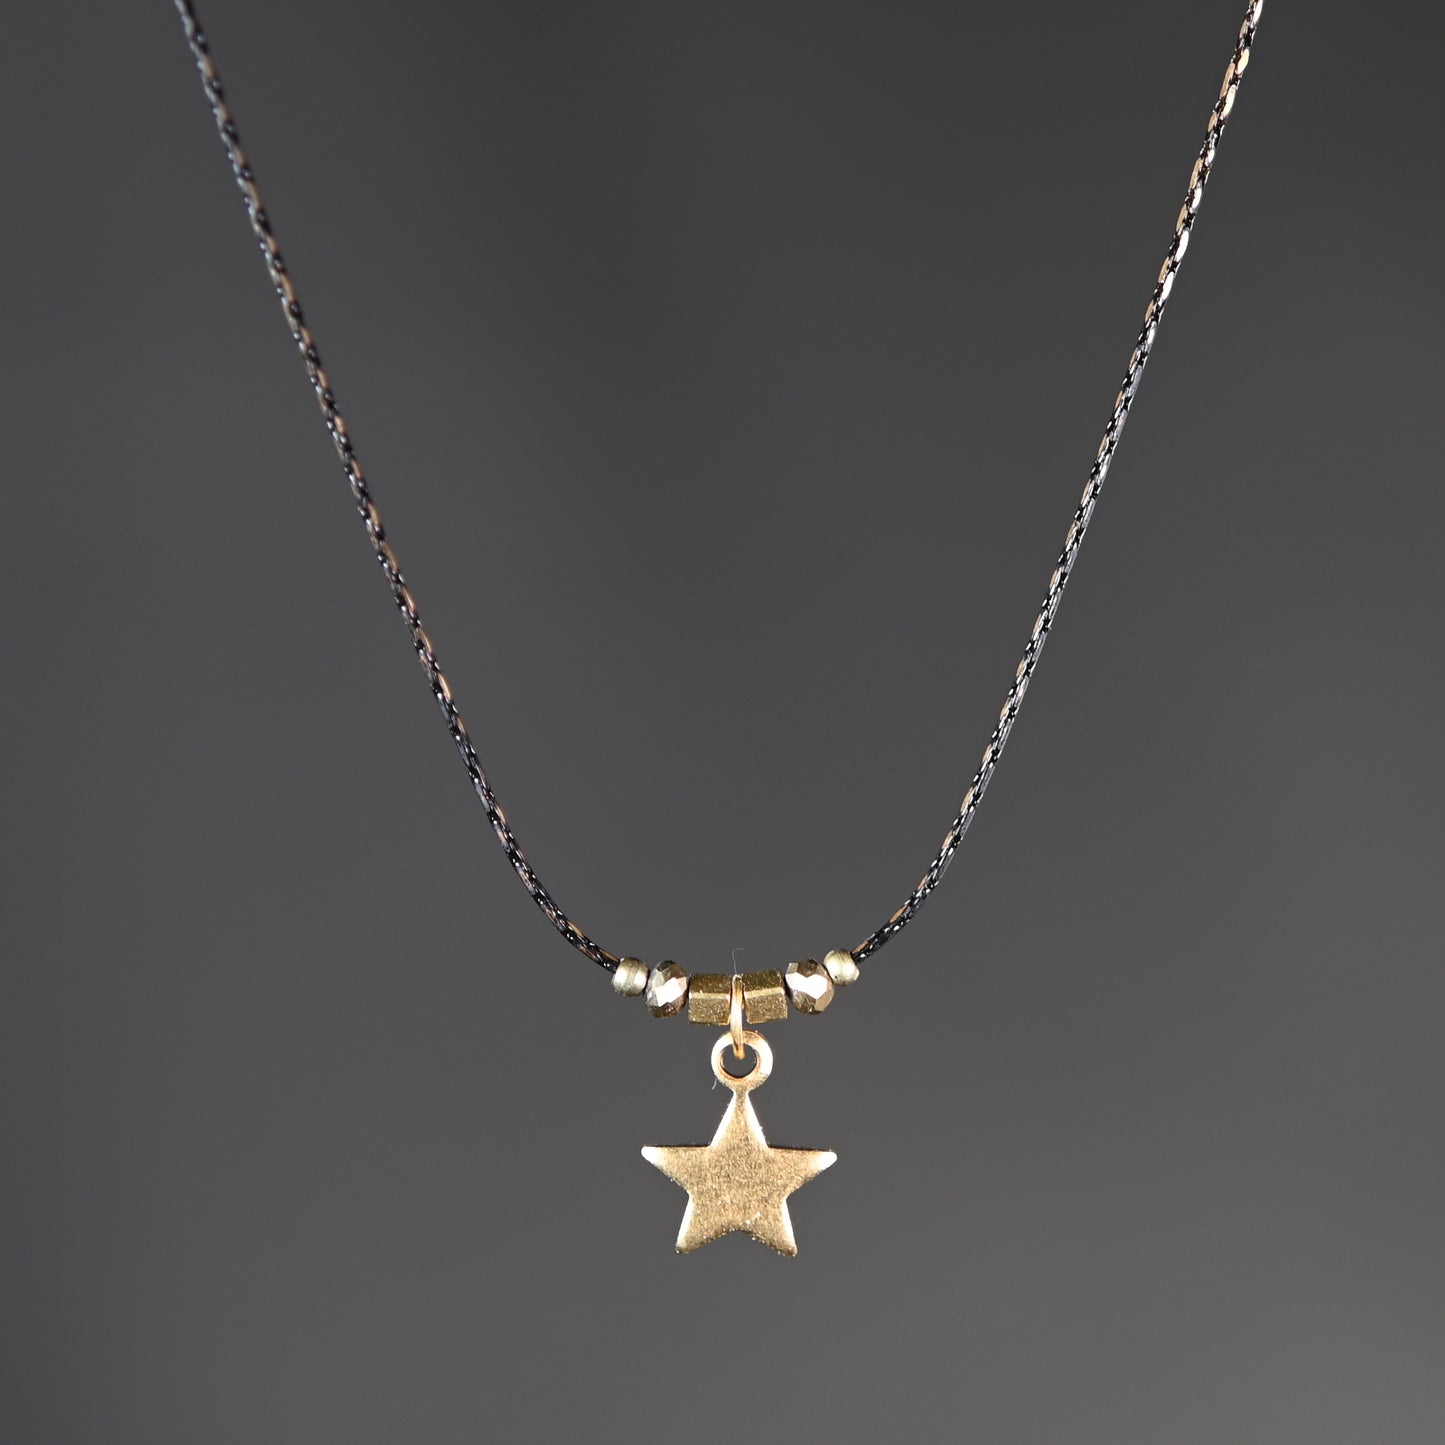 Delicate Beaded Star Necklace